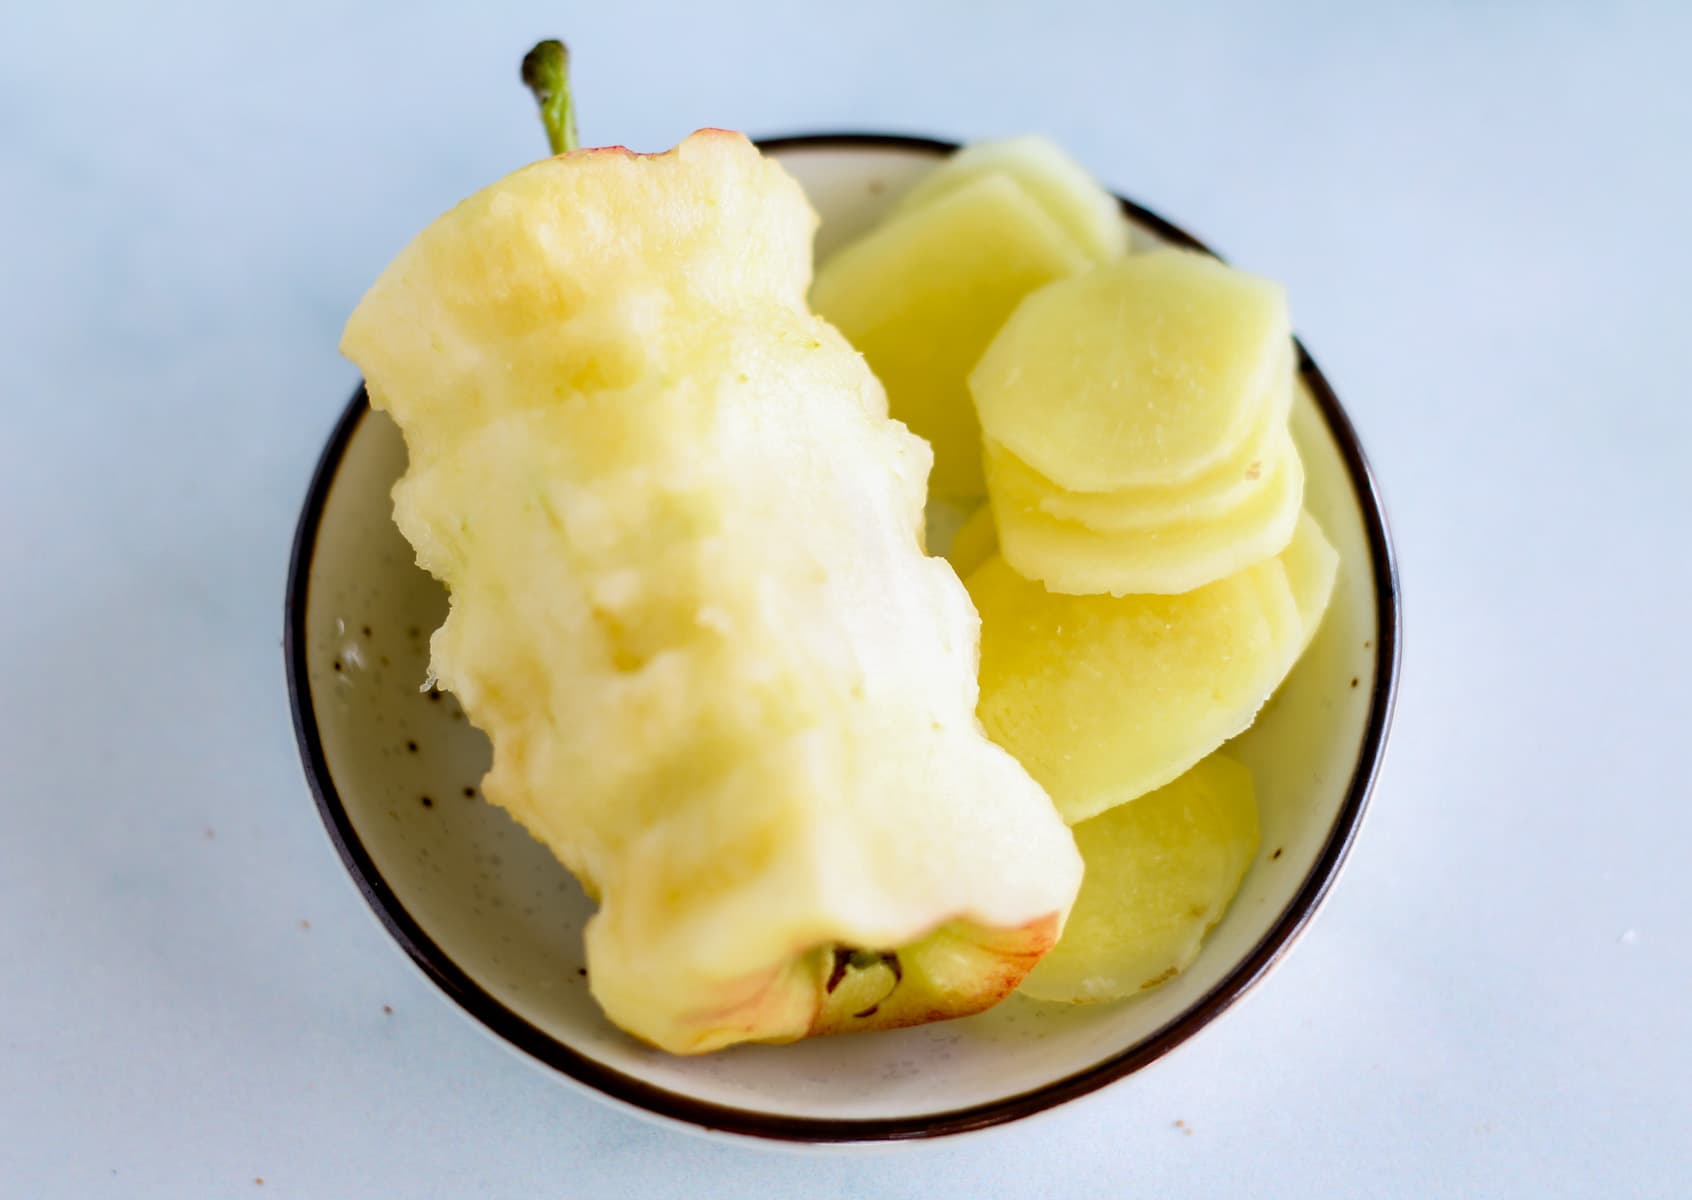 an apple core and sliced ginger on a plate.